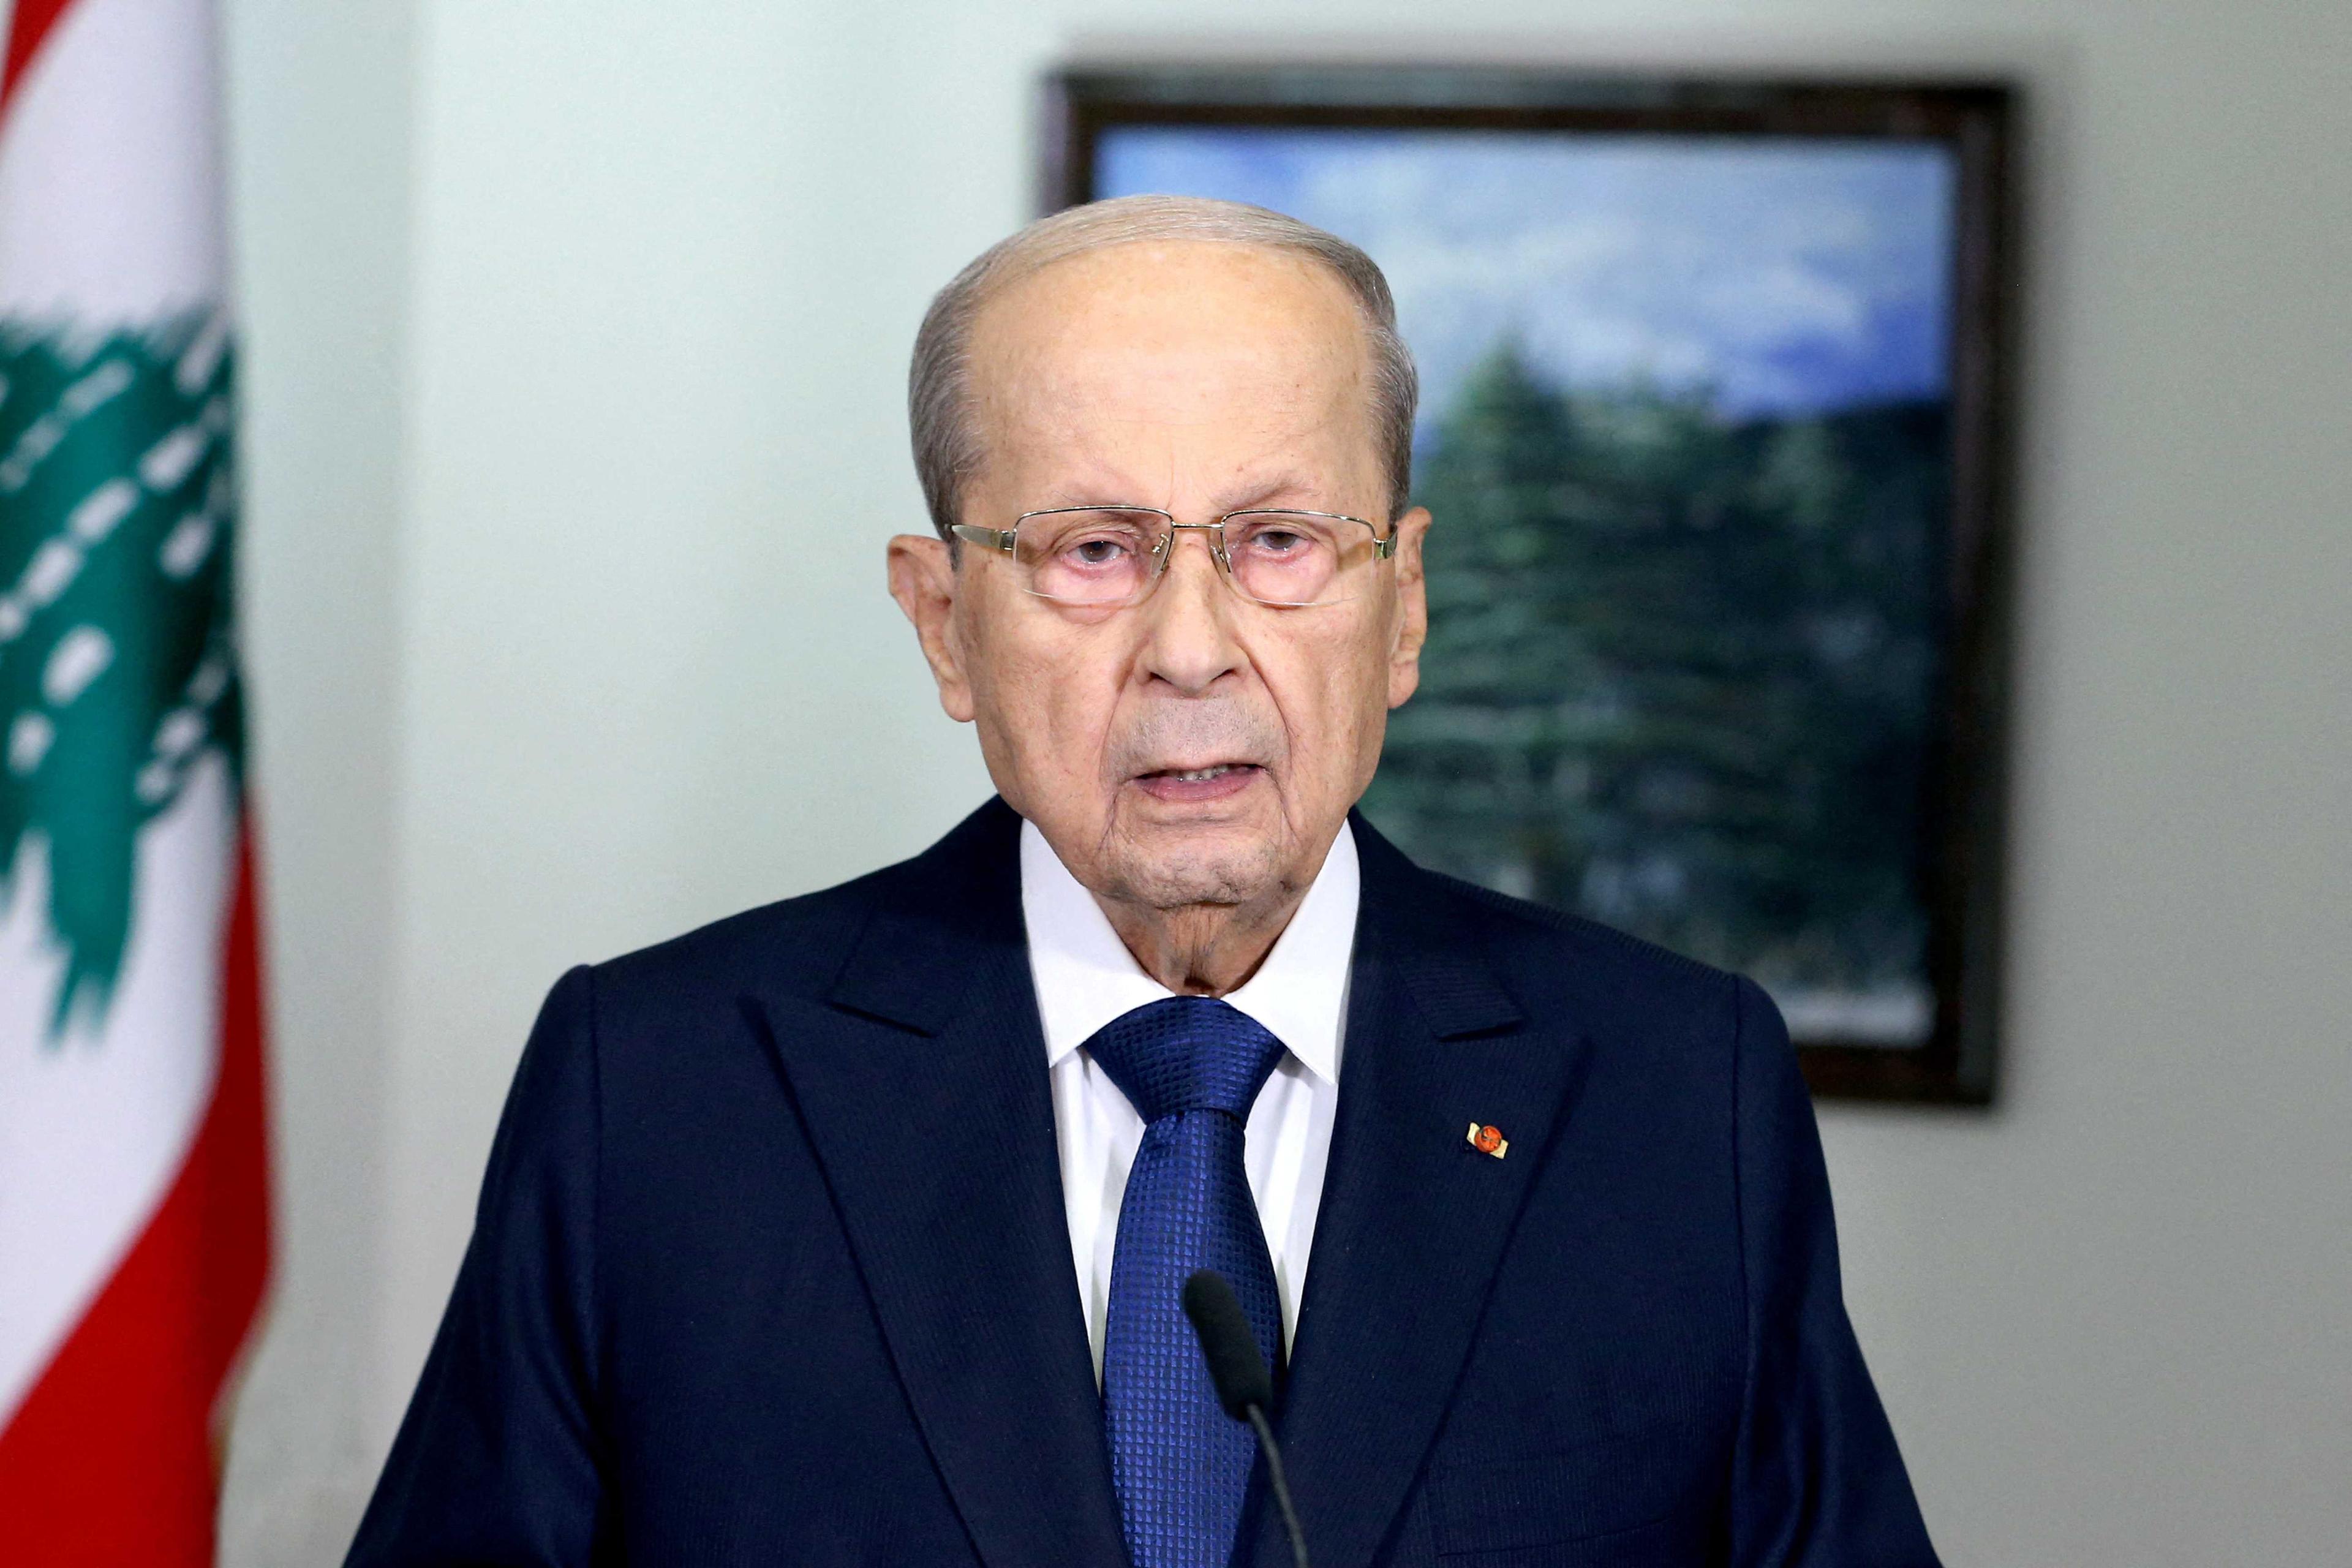 Lebanon's President Michel Aoun addresses the nation from the presidential palace in Baabda, Lebanon Oct 13. Photo: Reuters